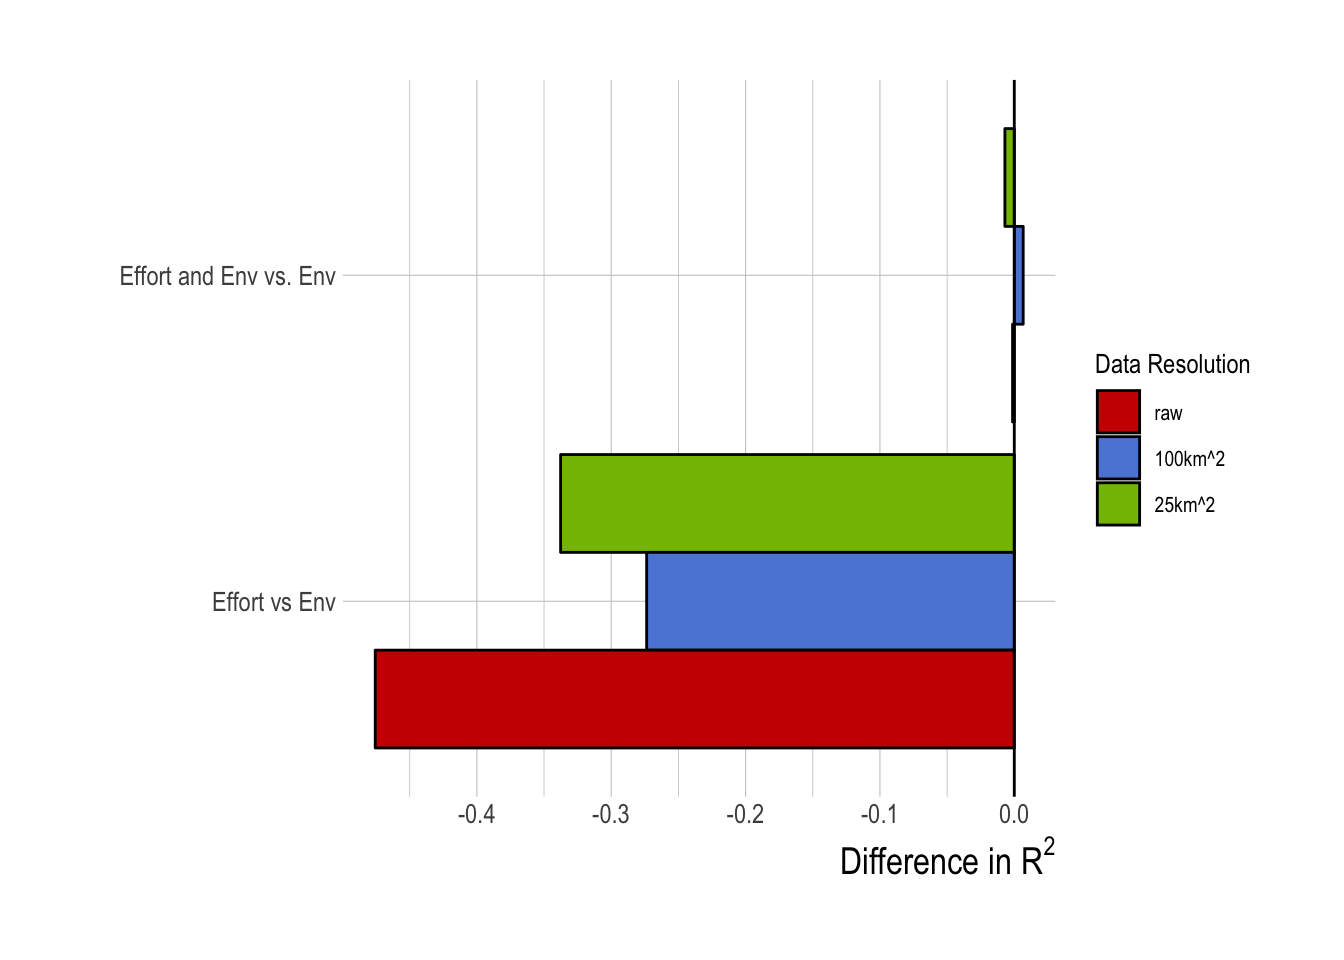 Differences in R2 of tuned random forest model with effort data relative to R2 obtained from only using environmental (env) data (negative implies worse performance than environmental data only)